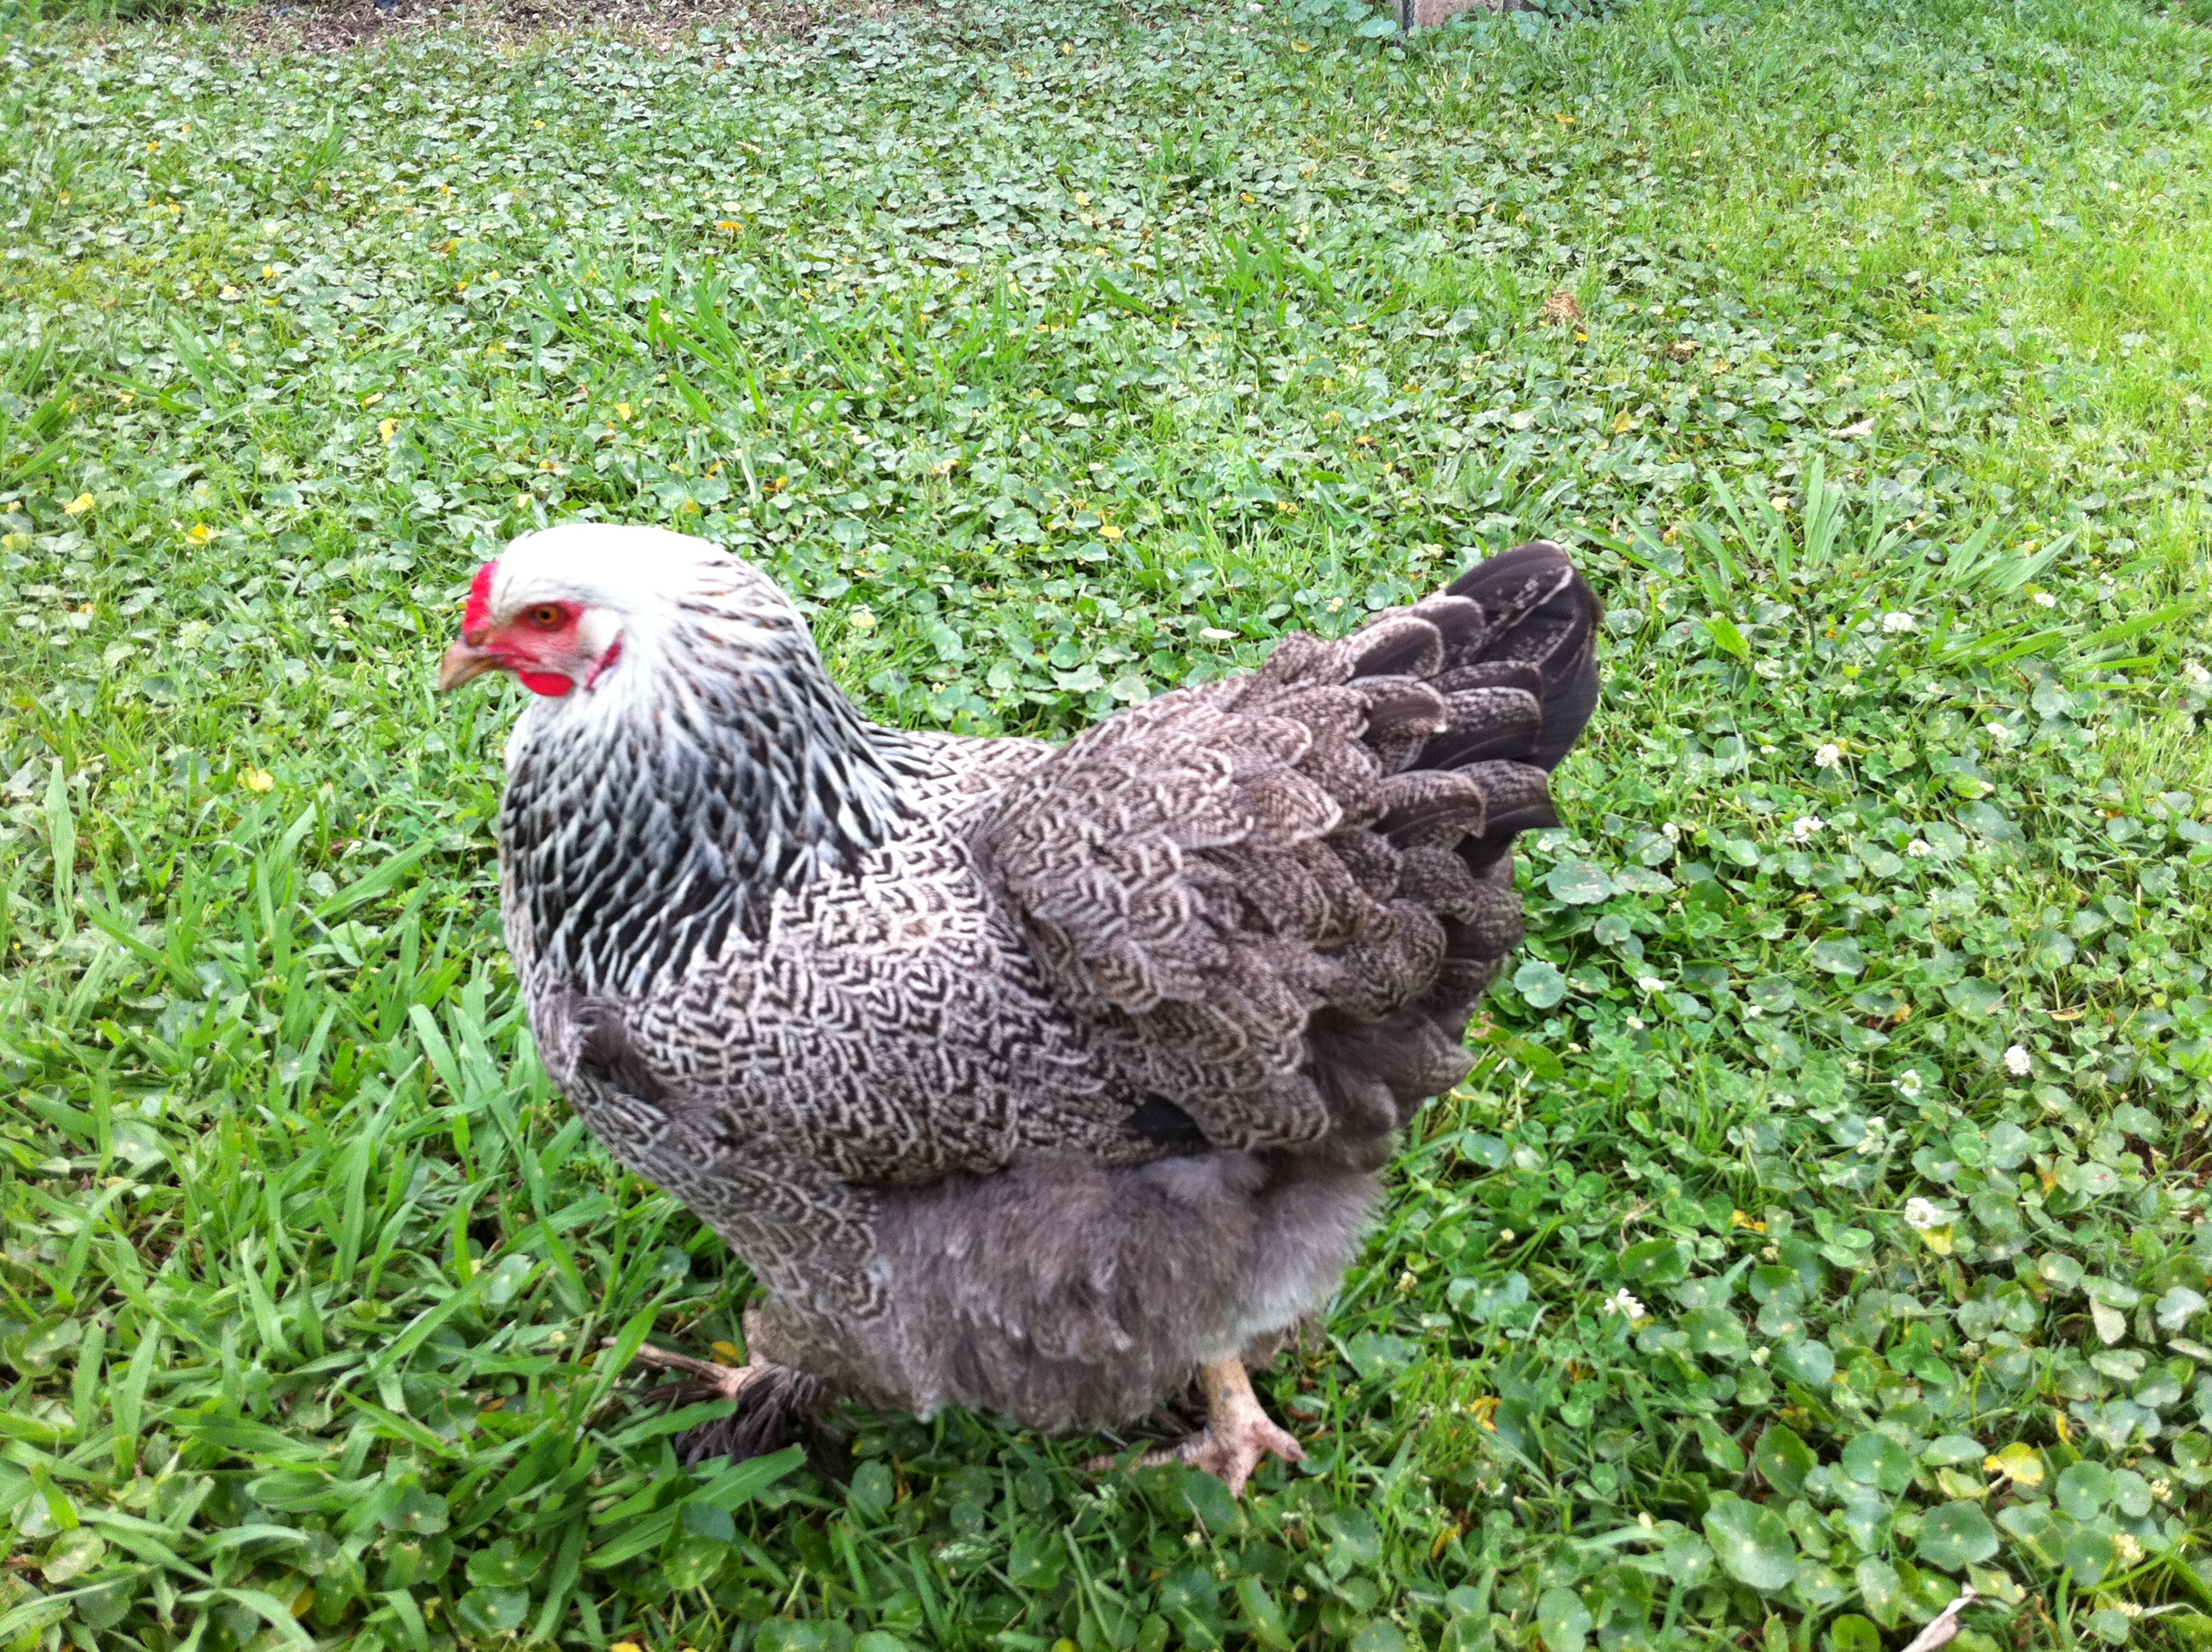 Chickens in the Yard | clothesontheline